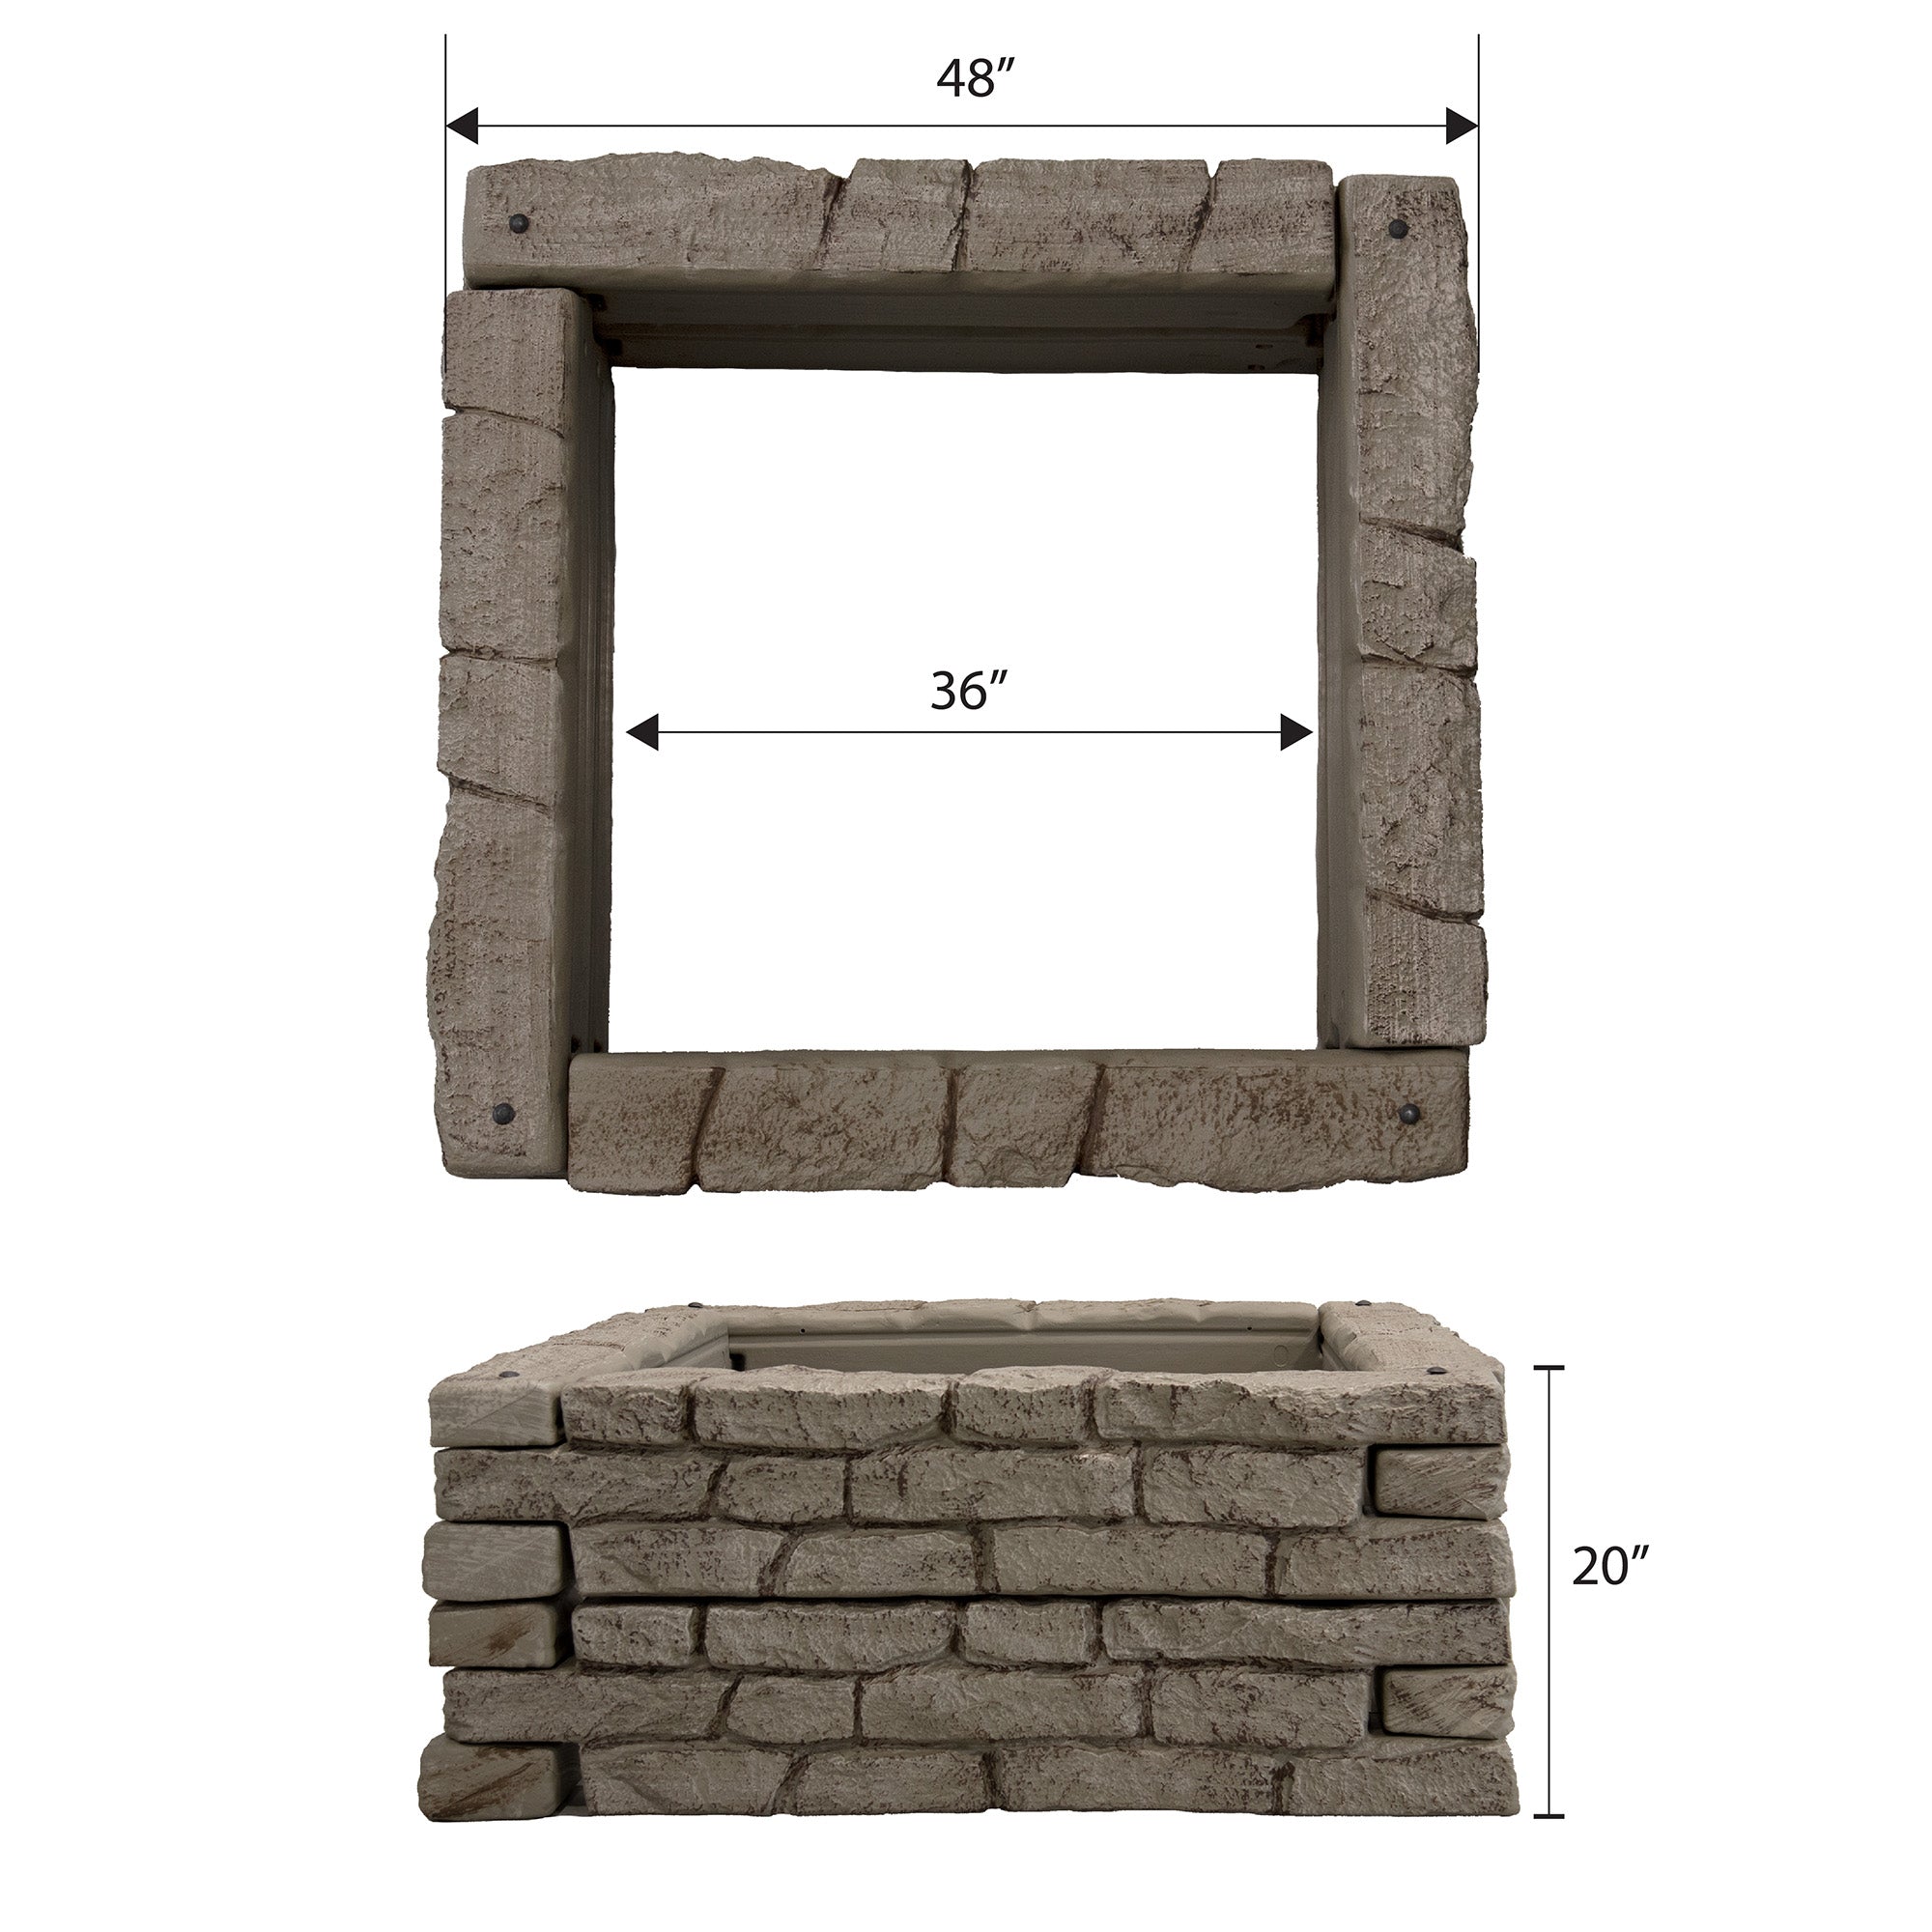 Rock Lock Raised Garden Bed Kit - 48 inch Square, 20 inch High